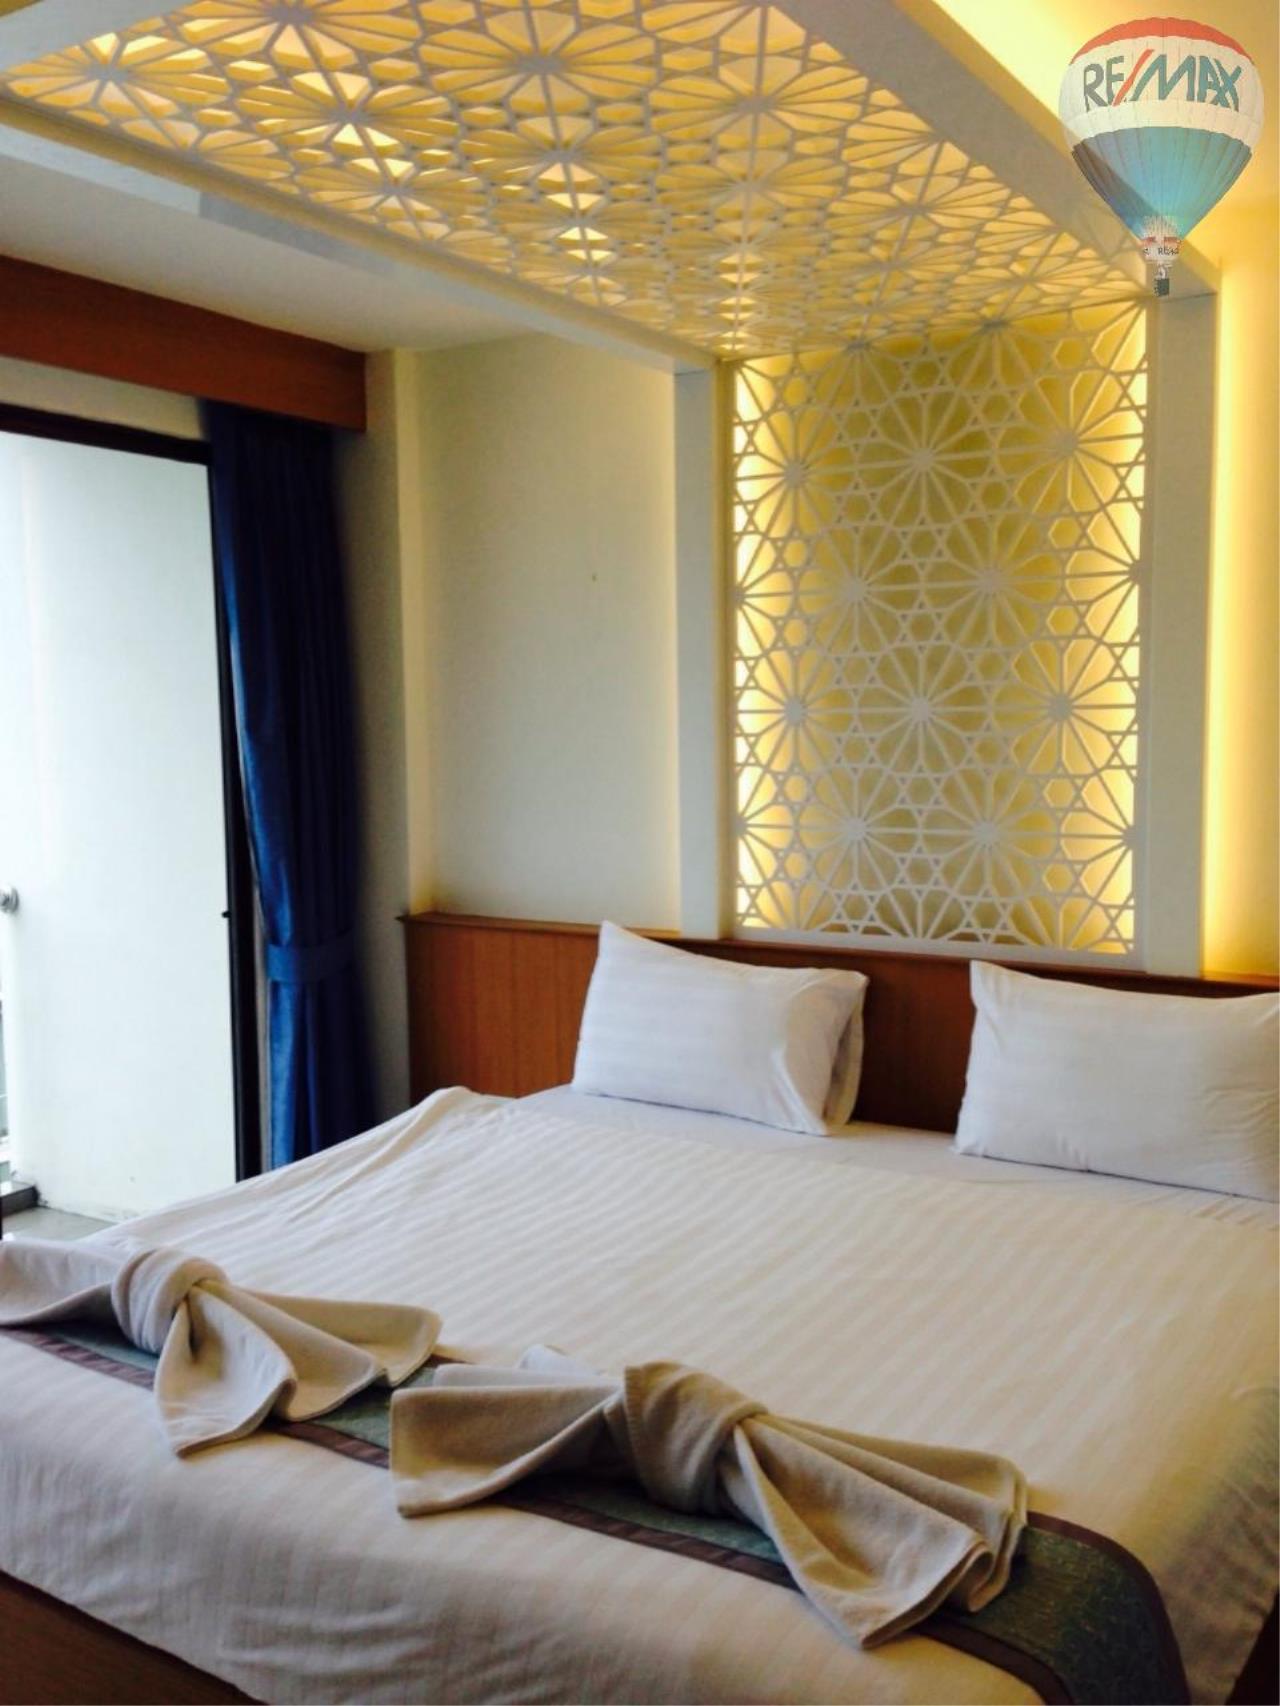 RE/MAX Top Properties Agency's 62 Rooms hotel Well Located Patong Beach 8